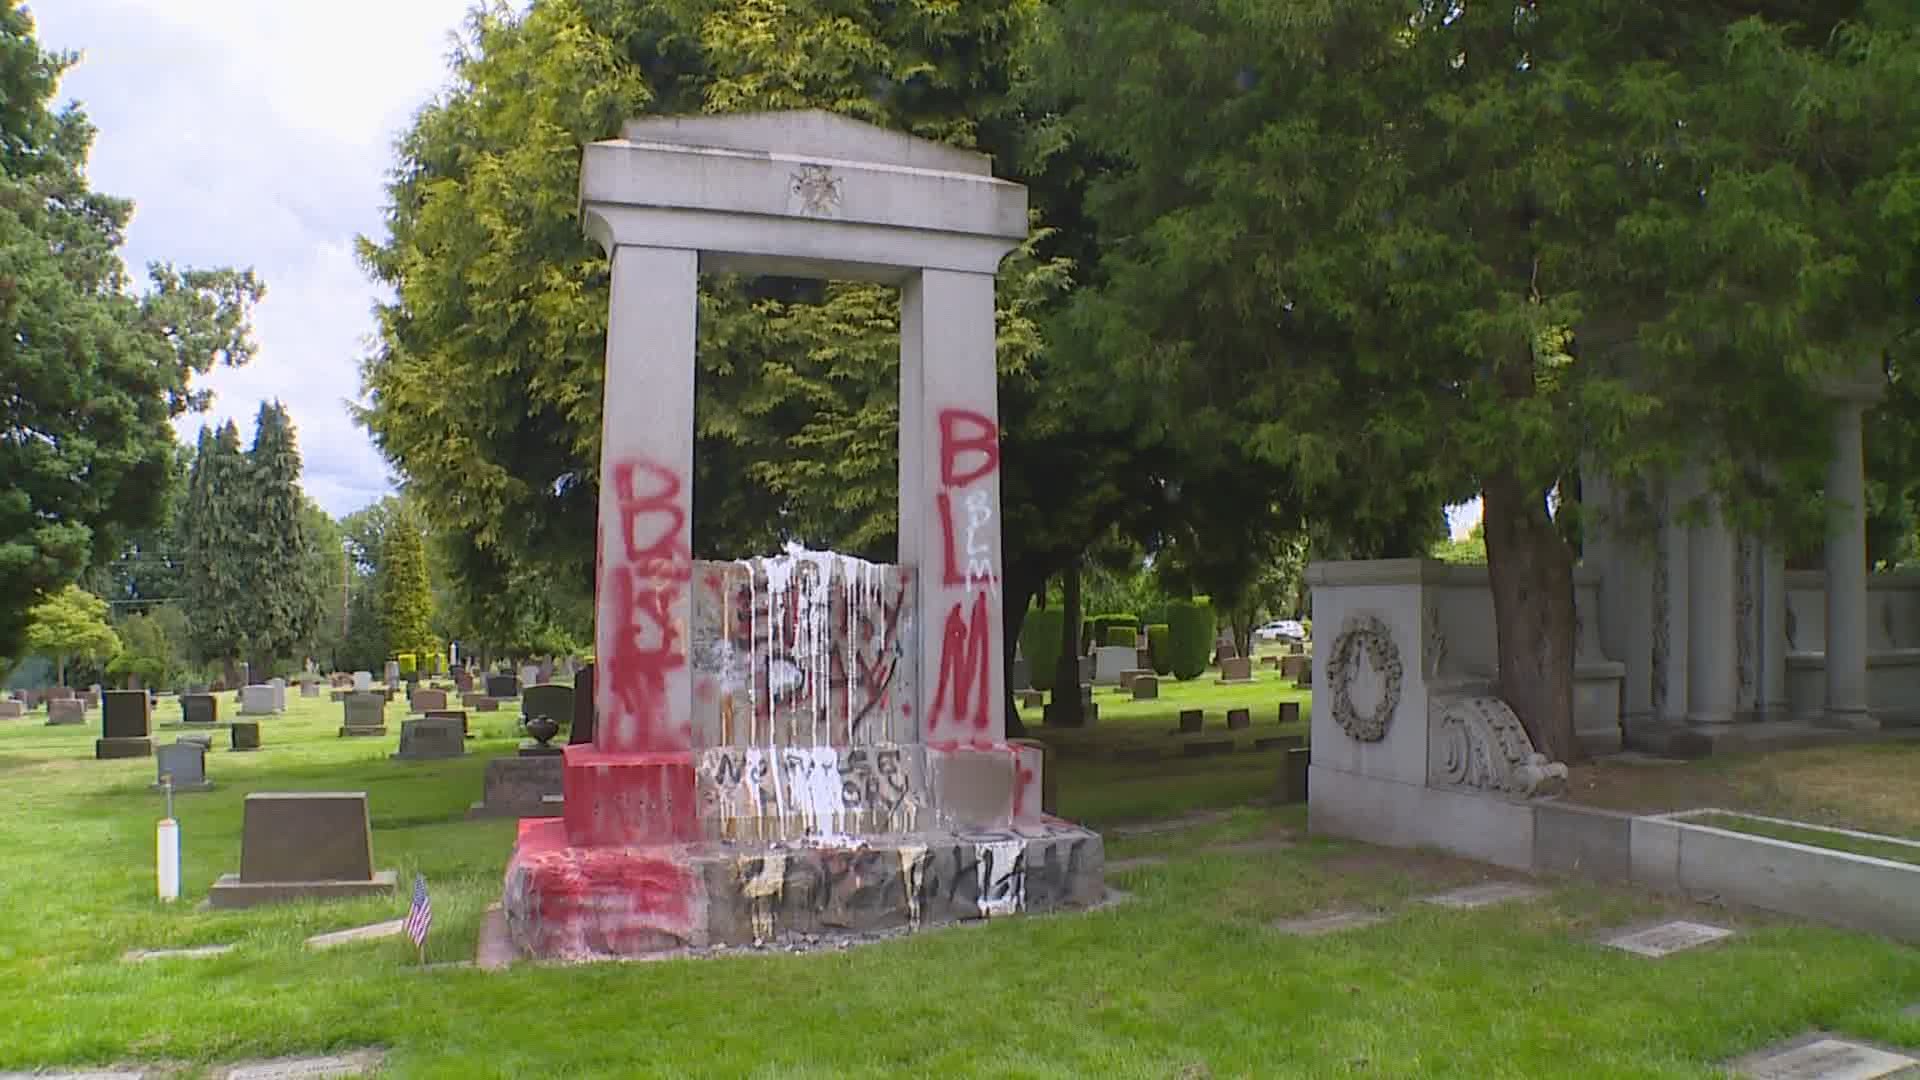 The Confederate memorial at Seattle's Lake View Cemetery was vandalized with spray paint over the weekend. Cemetery managers are now considering removing it.